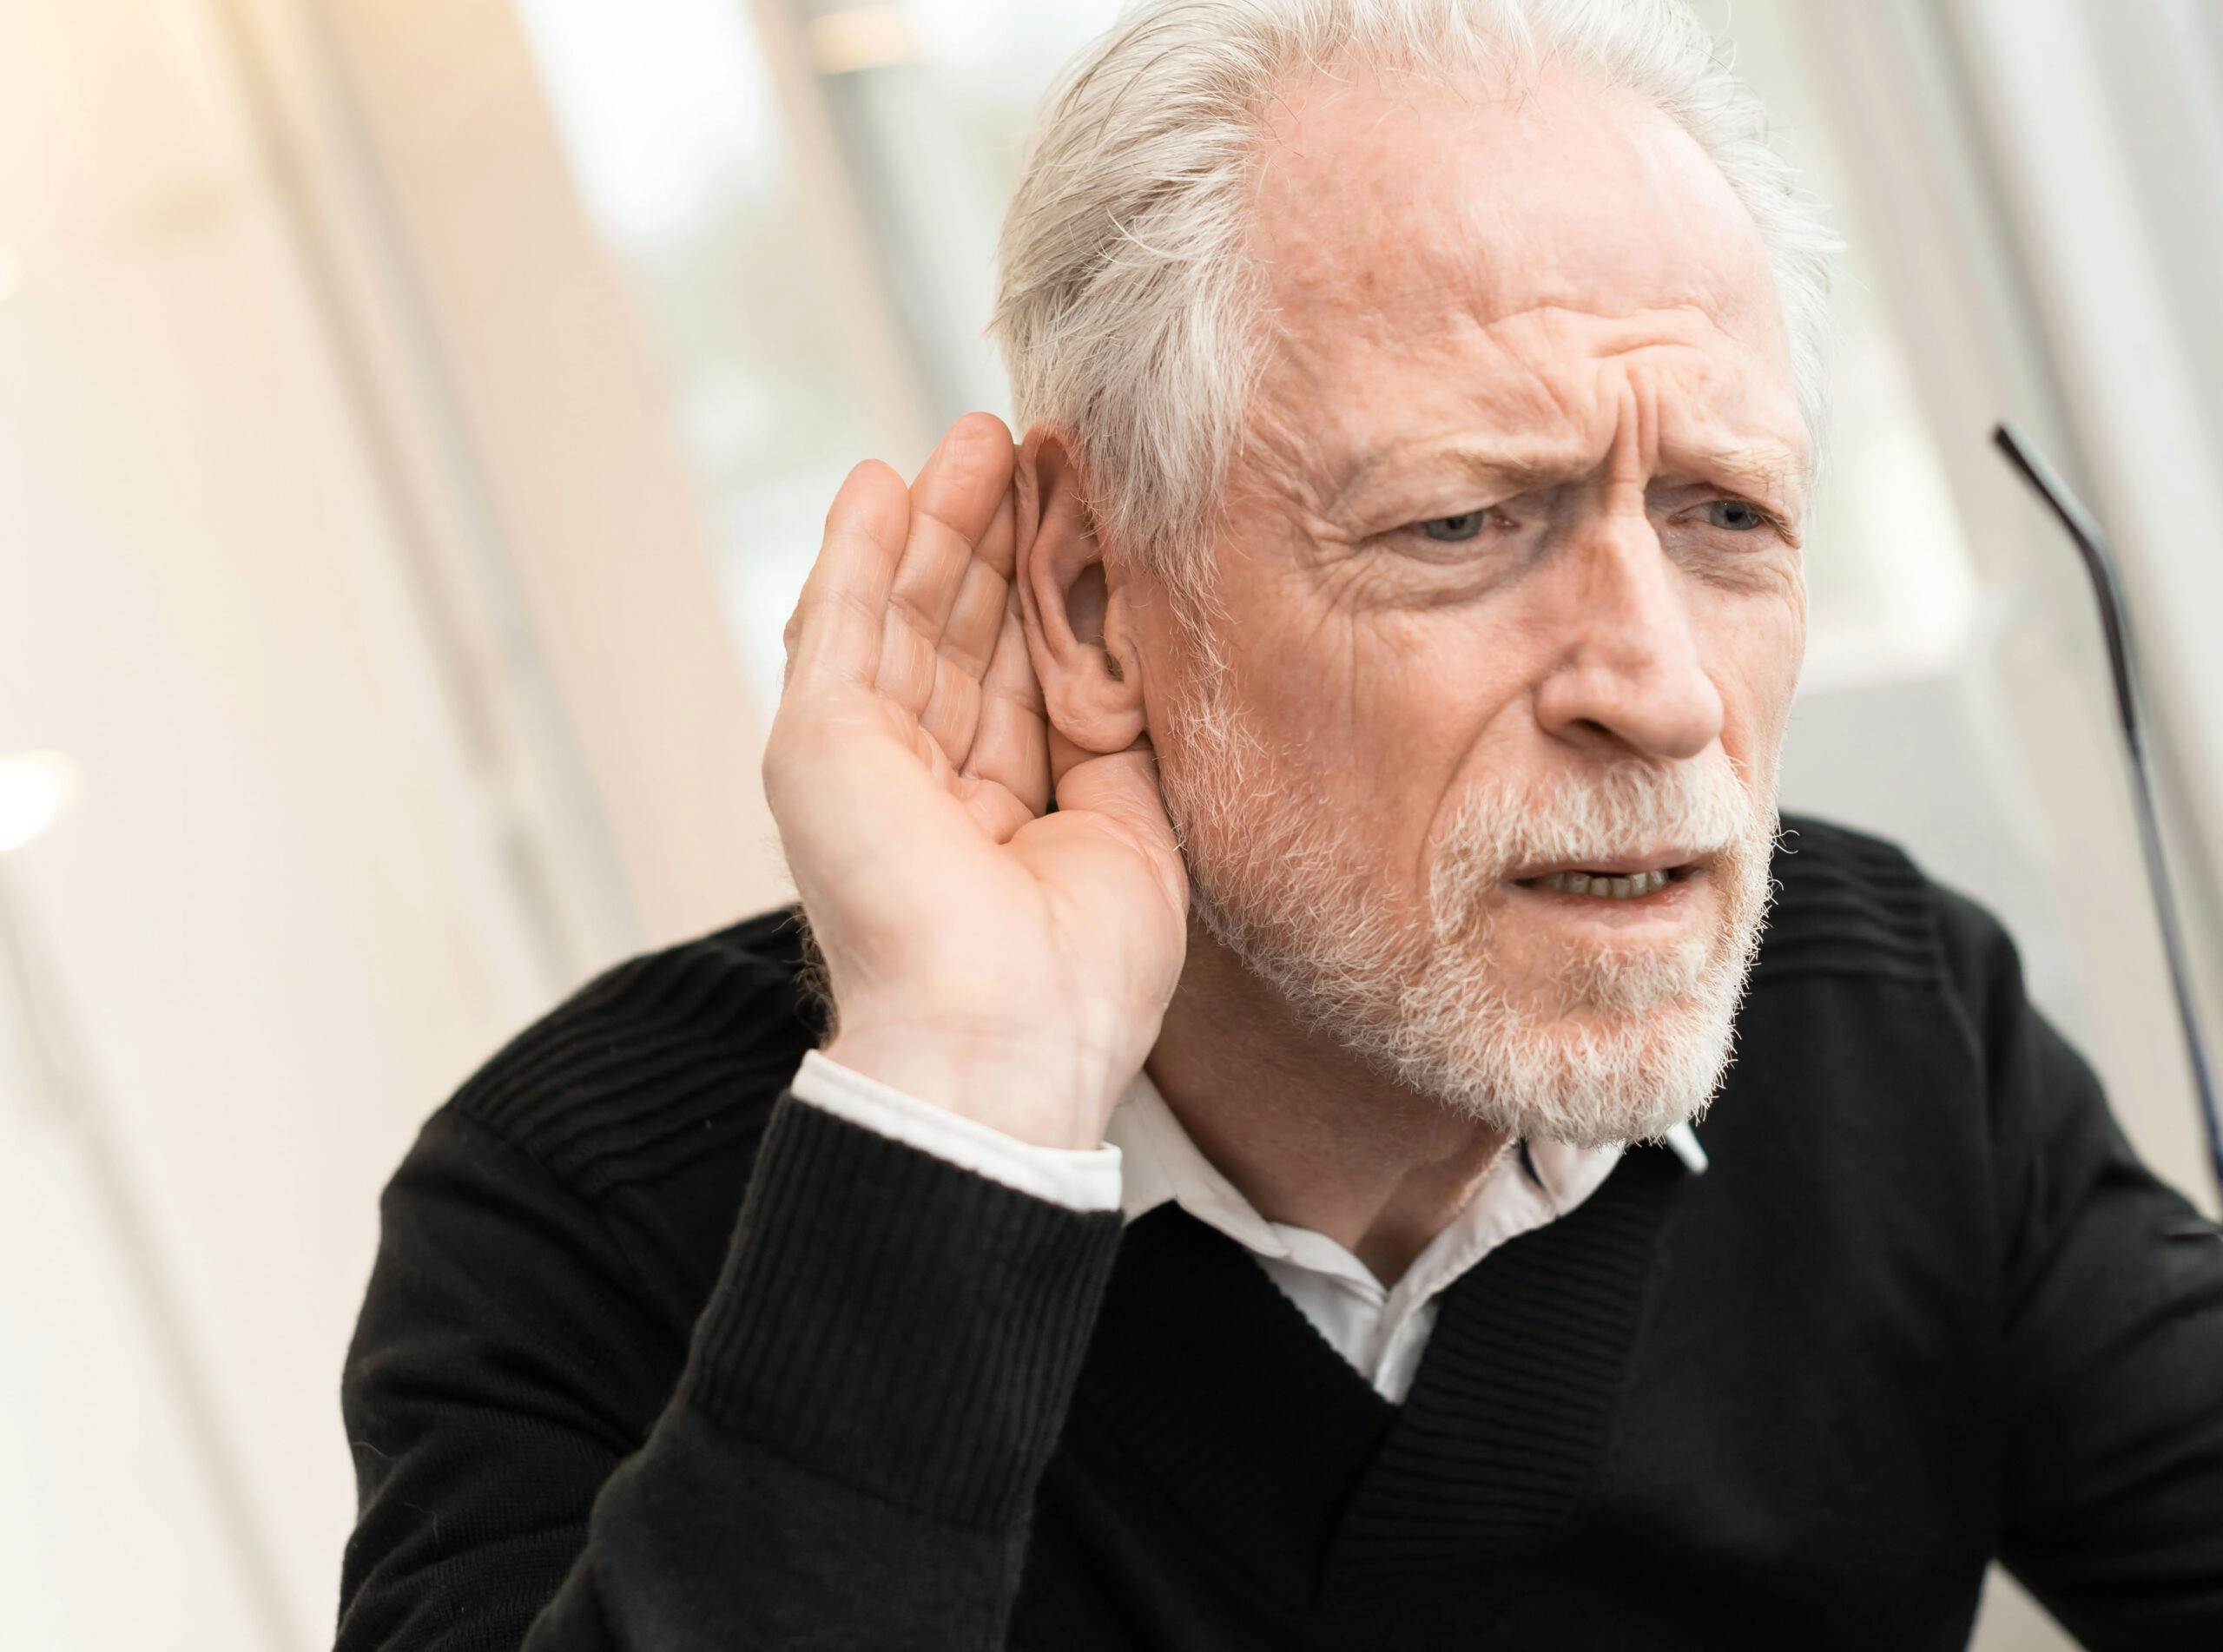 Man holding had to ear to hear better